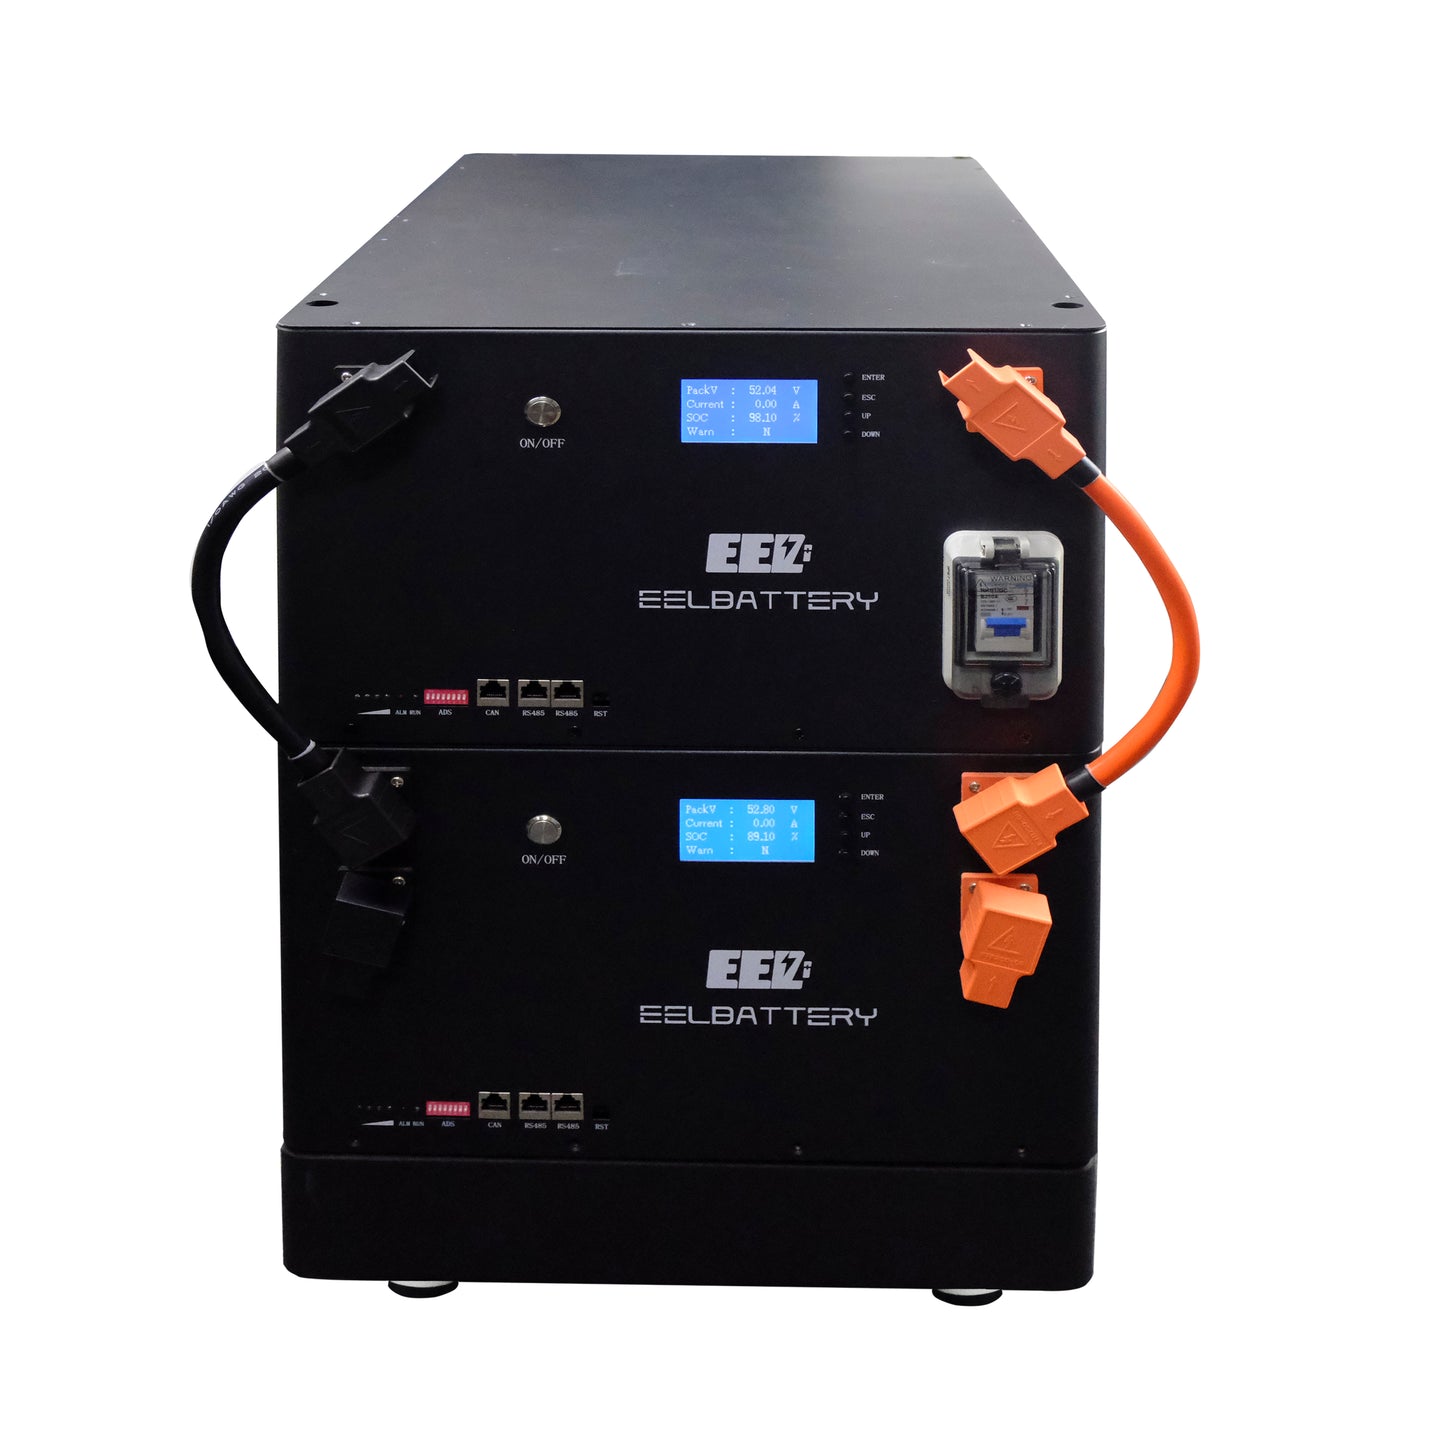 EEL 48V 16S V4 Server Rack Battery DIY 280 Box Kits with Bluetooth BMS Energy Storage Stackable Type